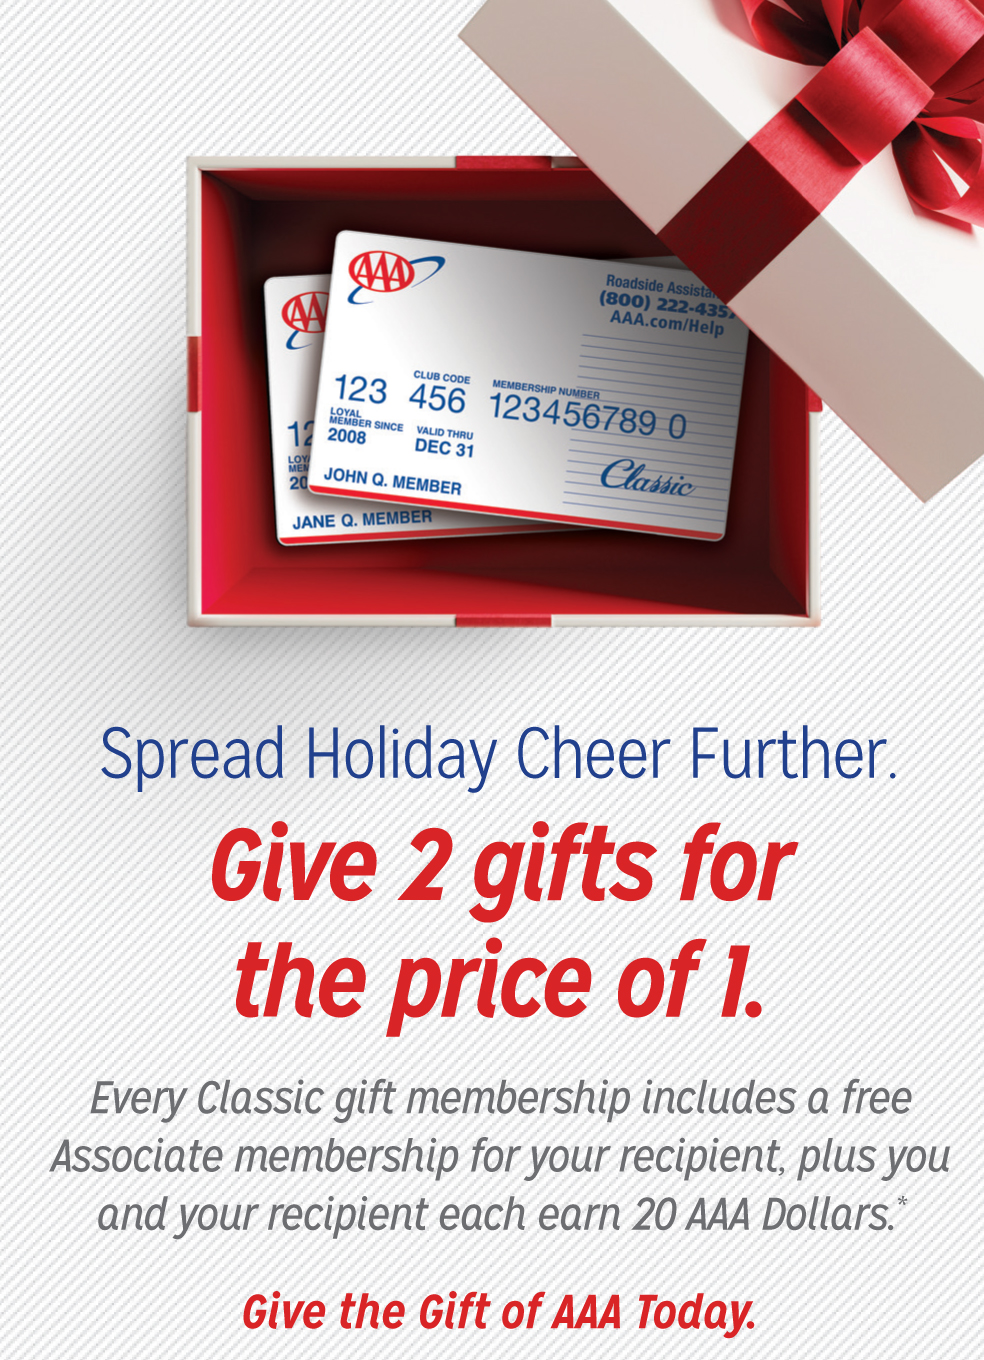 Spread Holiday Cheer Further. Give 2 gifts for the price of 1. Every classic gift membership includes a free Associate membership for your recipient, plus you and your recipient each earn 20 AAA Dollars. Give the gift of AAA Today.